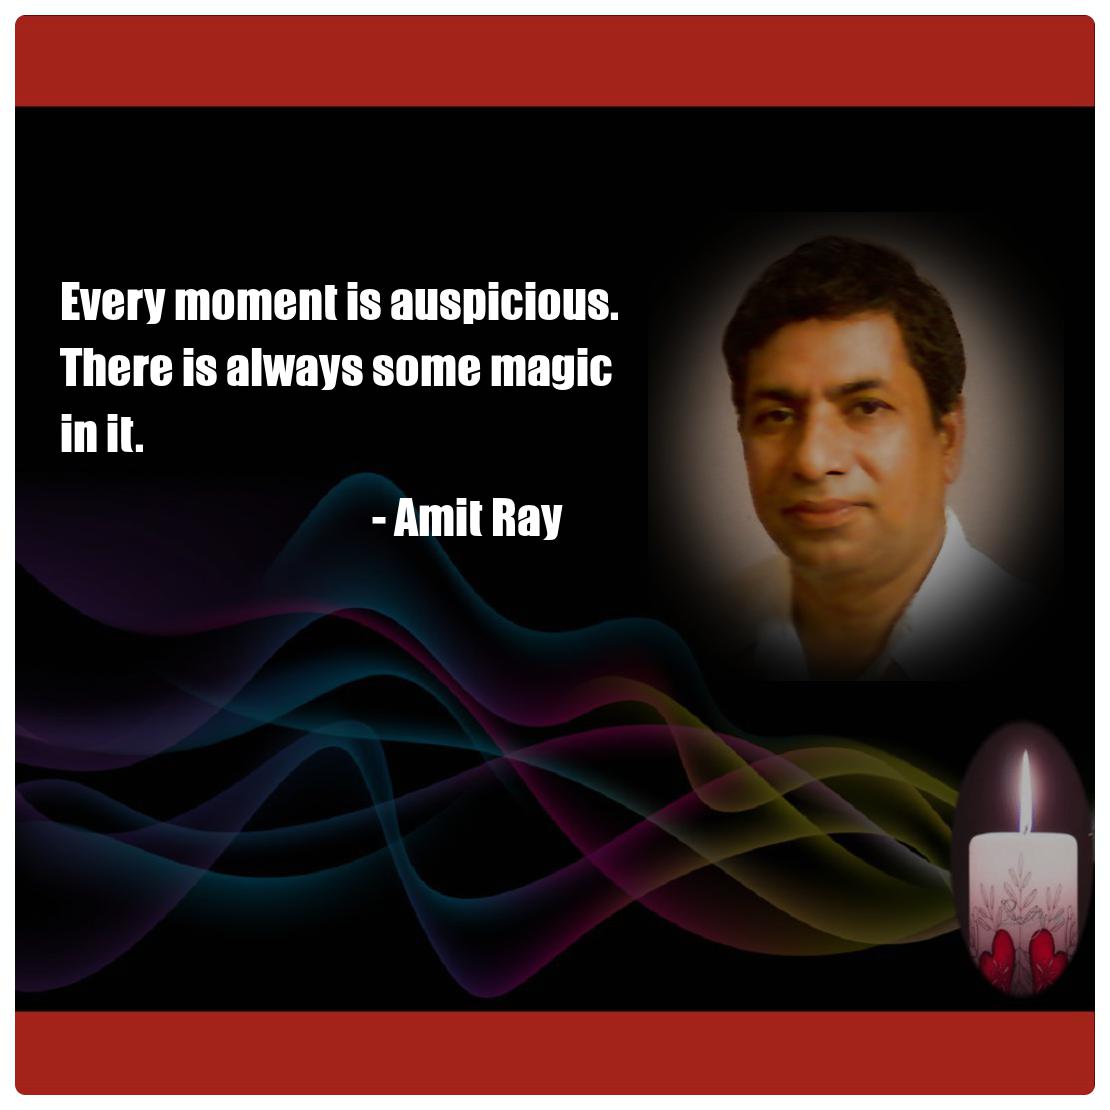 Every moment is auspicious. There is always some magic in it. -- Amit Ray